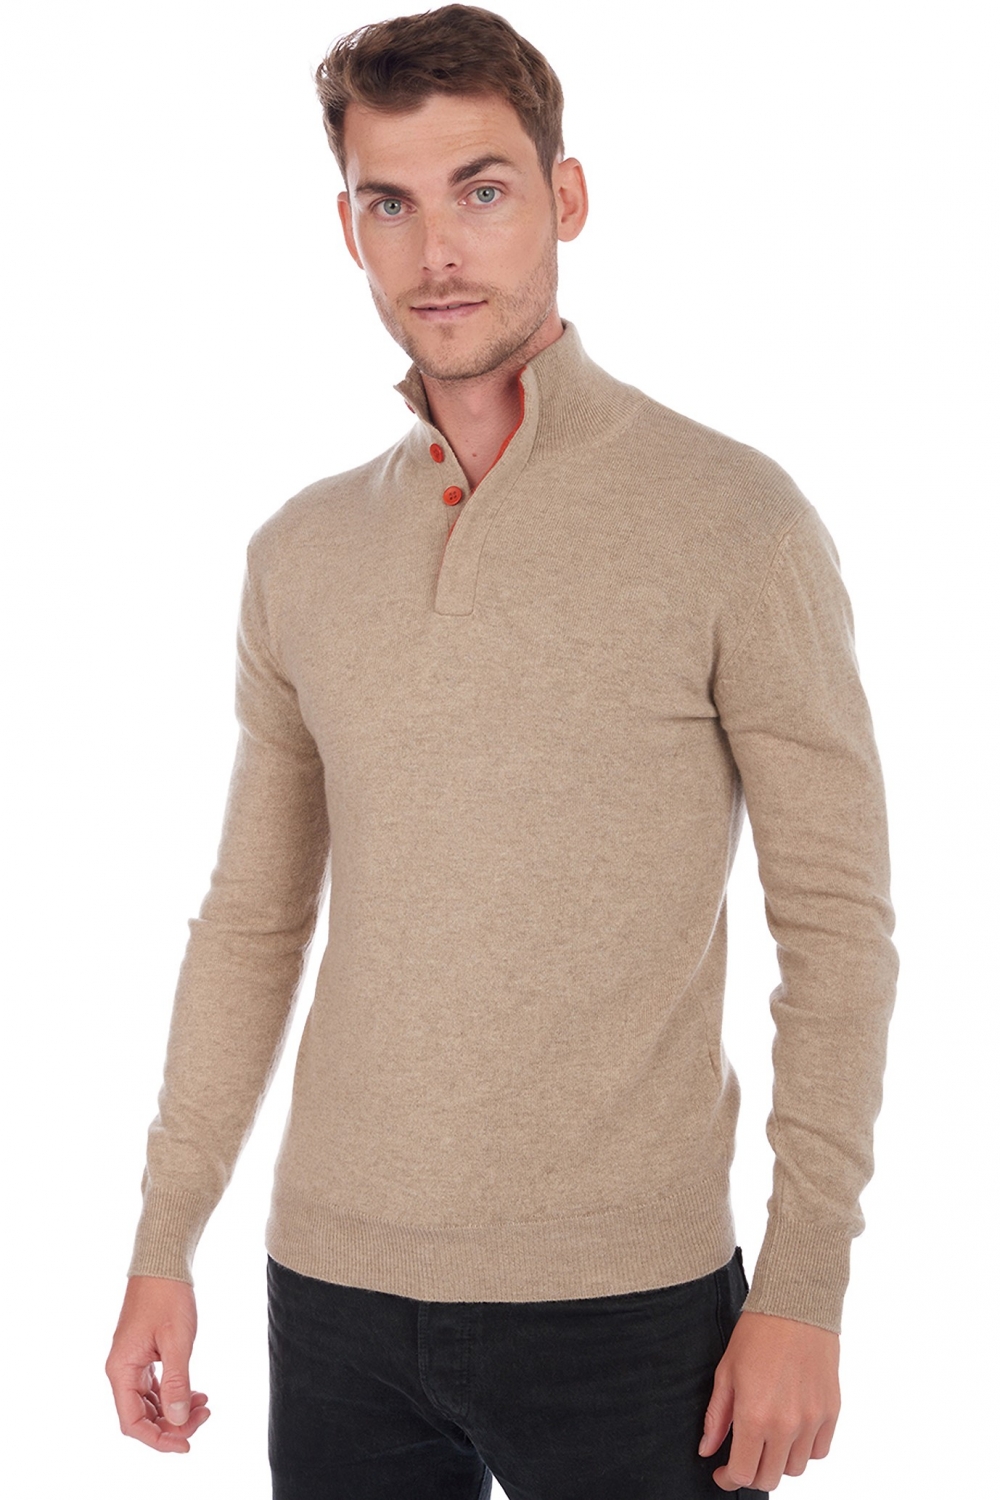 Cachemire pull homme gauvain natural brown paprika 3xl